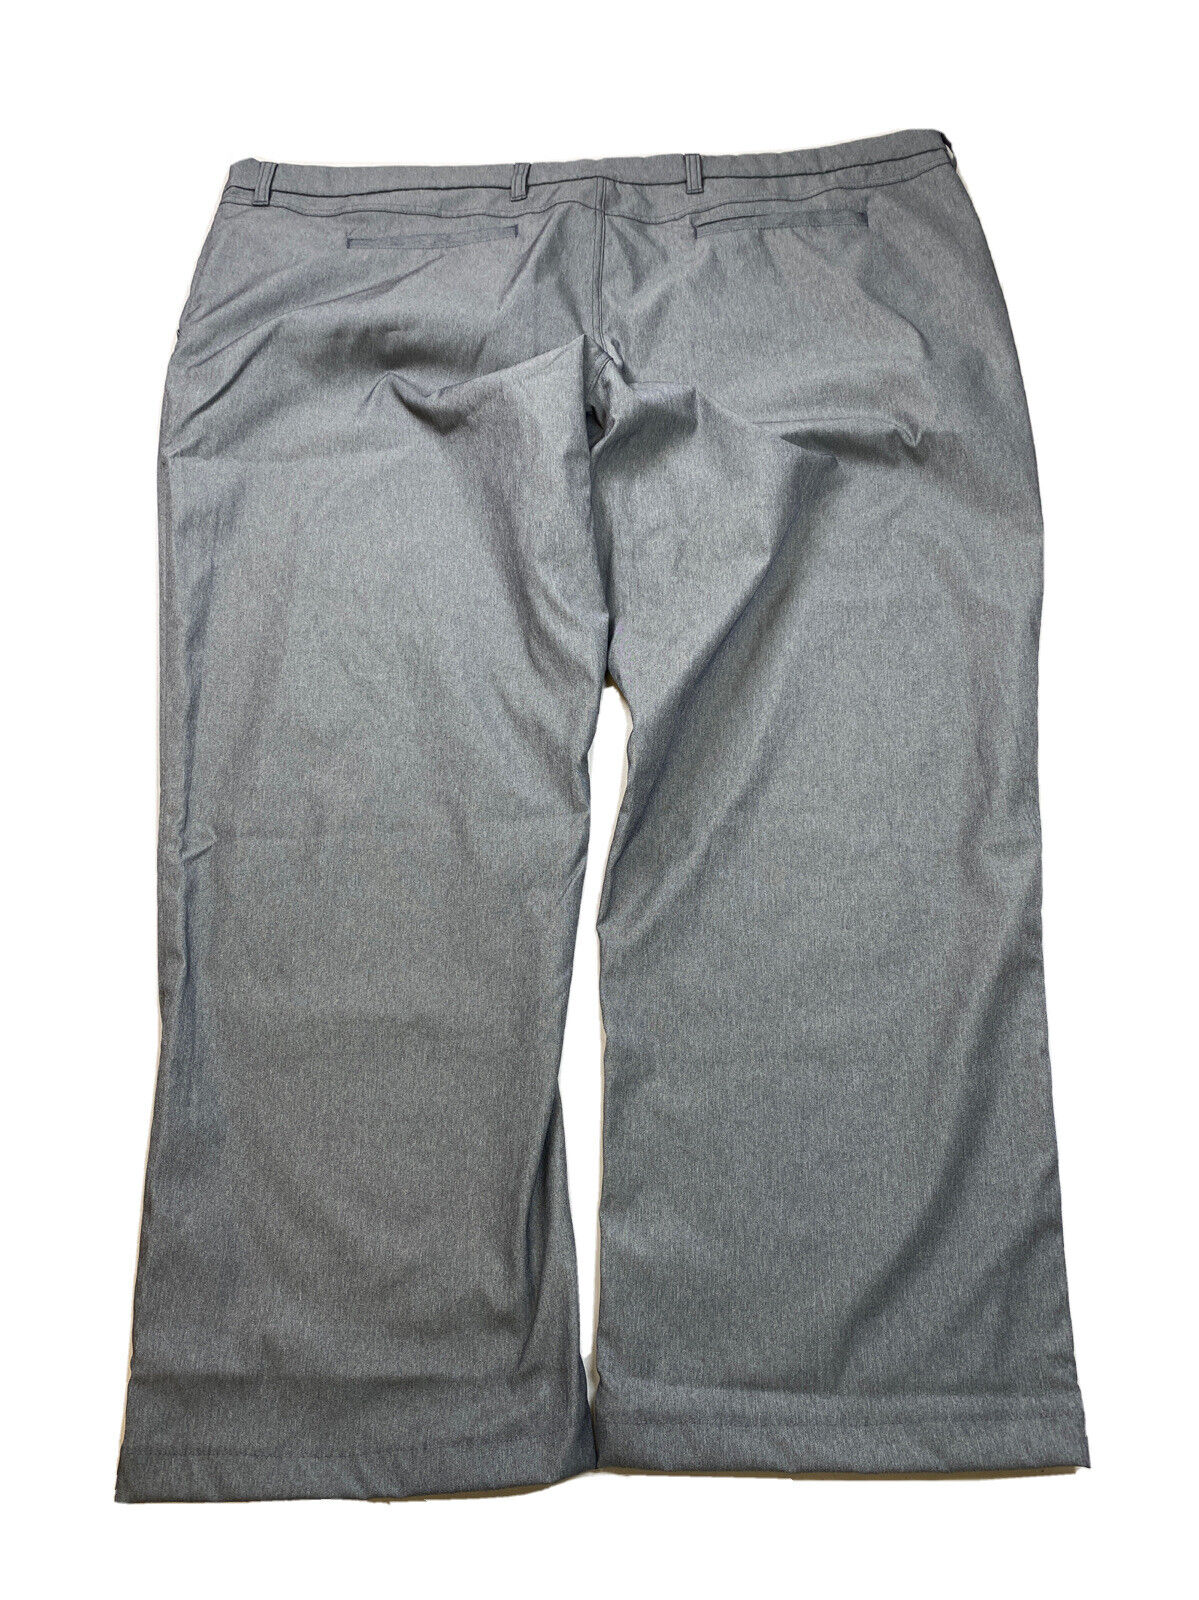 NEW Lands' End Men's Gray Polyester Elastic Waist Tech Chino Pants - 54 T